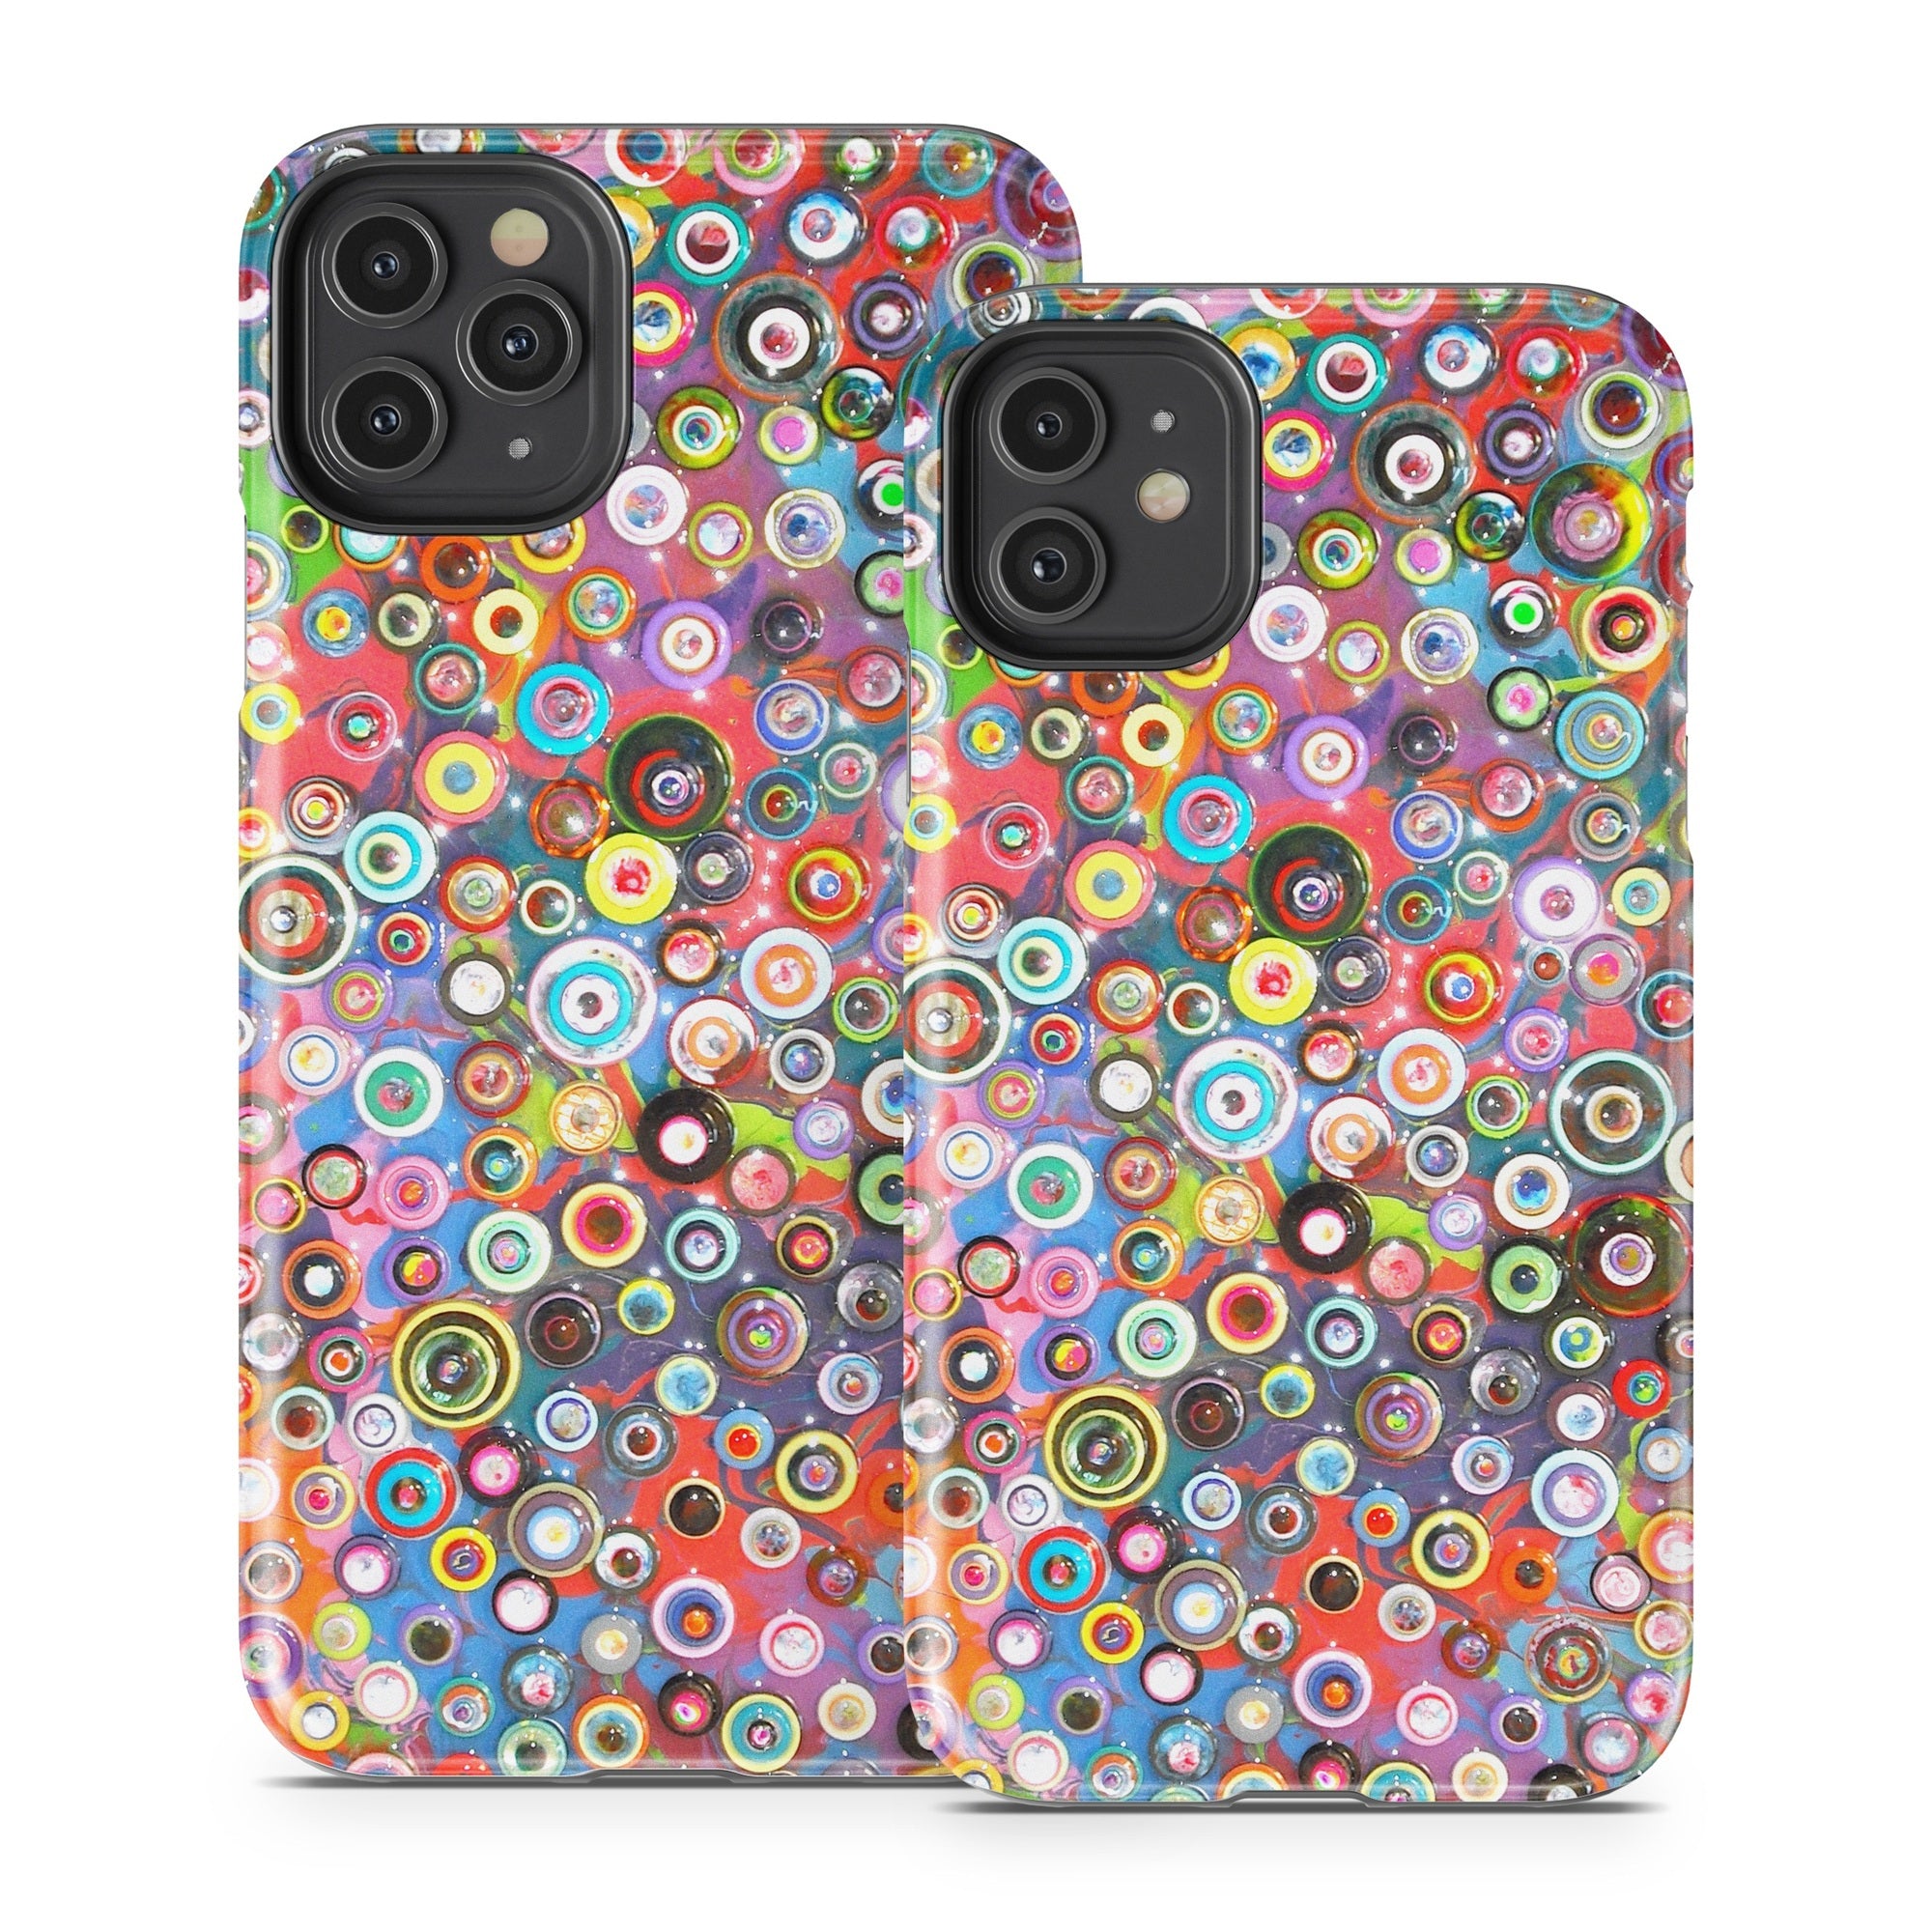 Round and Round - Apple iPhone 11 Tough Case